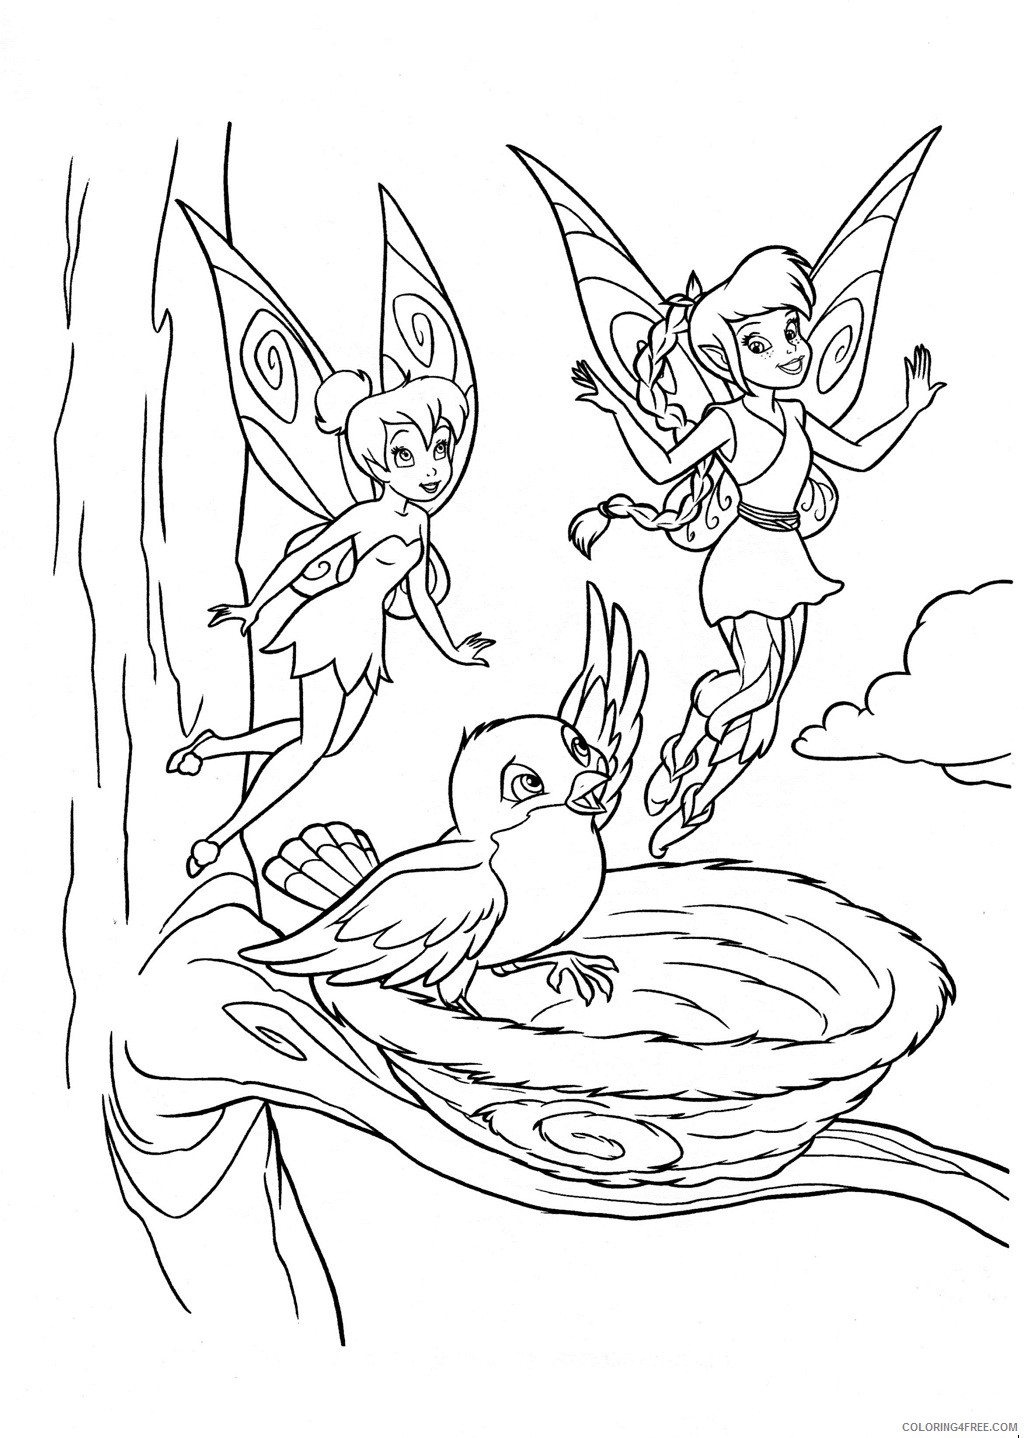 Tinker Bell Coloring Pages Cartoons Tinker Bell Free Printable 2020 6677 Coloring4free